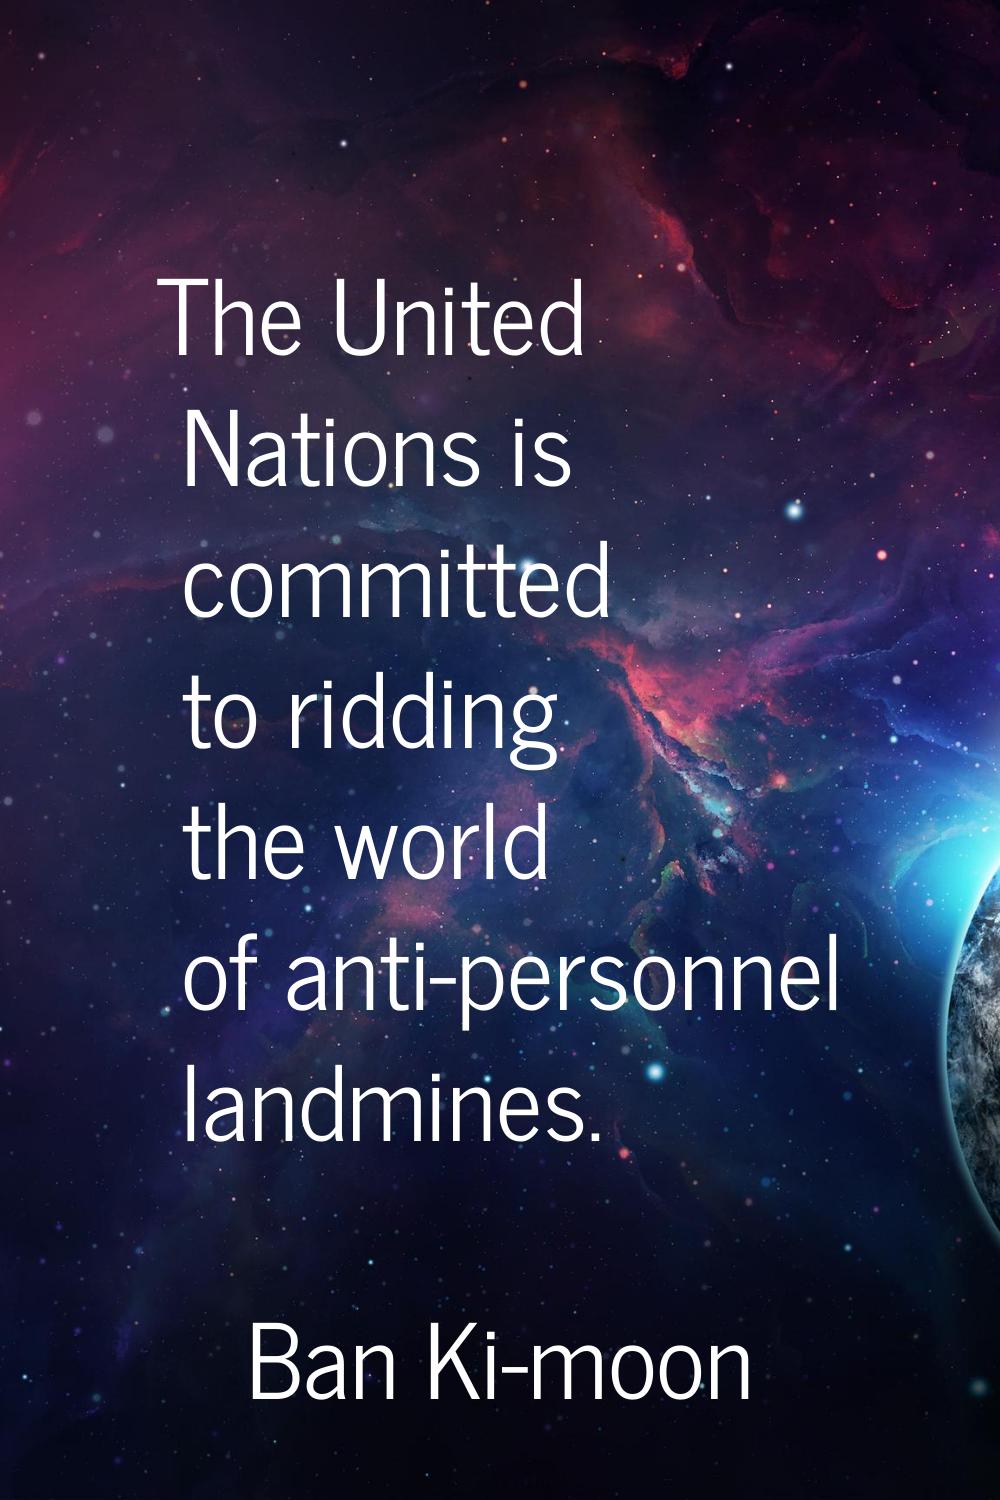 The United Nations is committed to ridding the world of anti-personnel landmines.